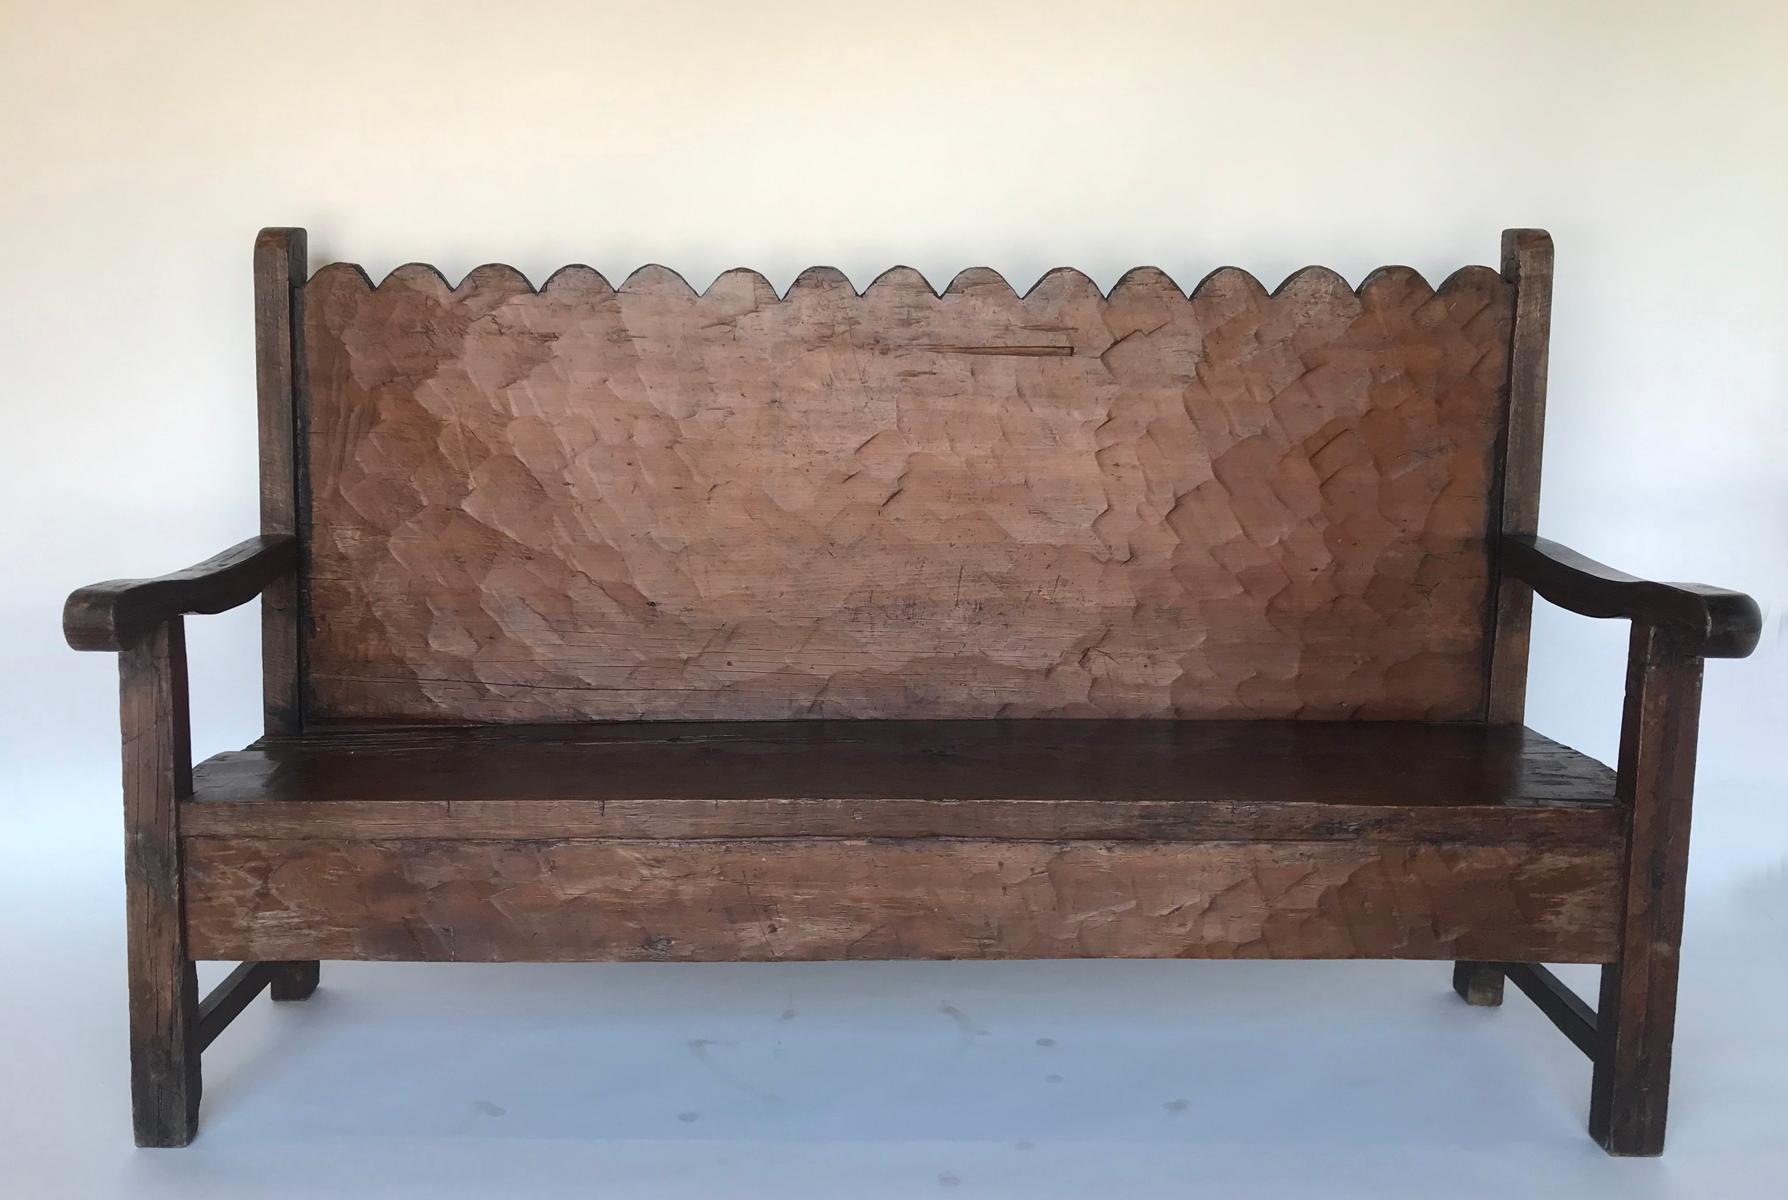 Great looking vintage Chajul bench from the highlands of Guatemala. The back consists of one wide board, traditionally hand hewn using a machete, and finished off with a series of scallops. Seat is also one wide board with a few mariposa (butterfly)